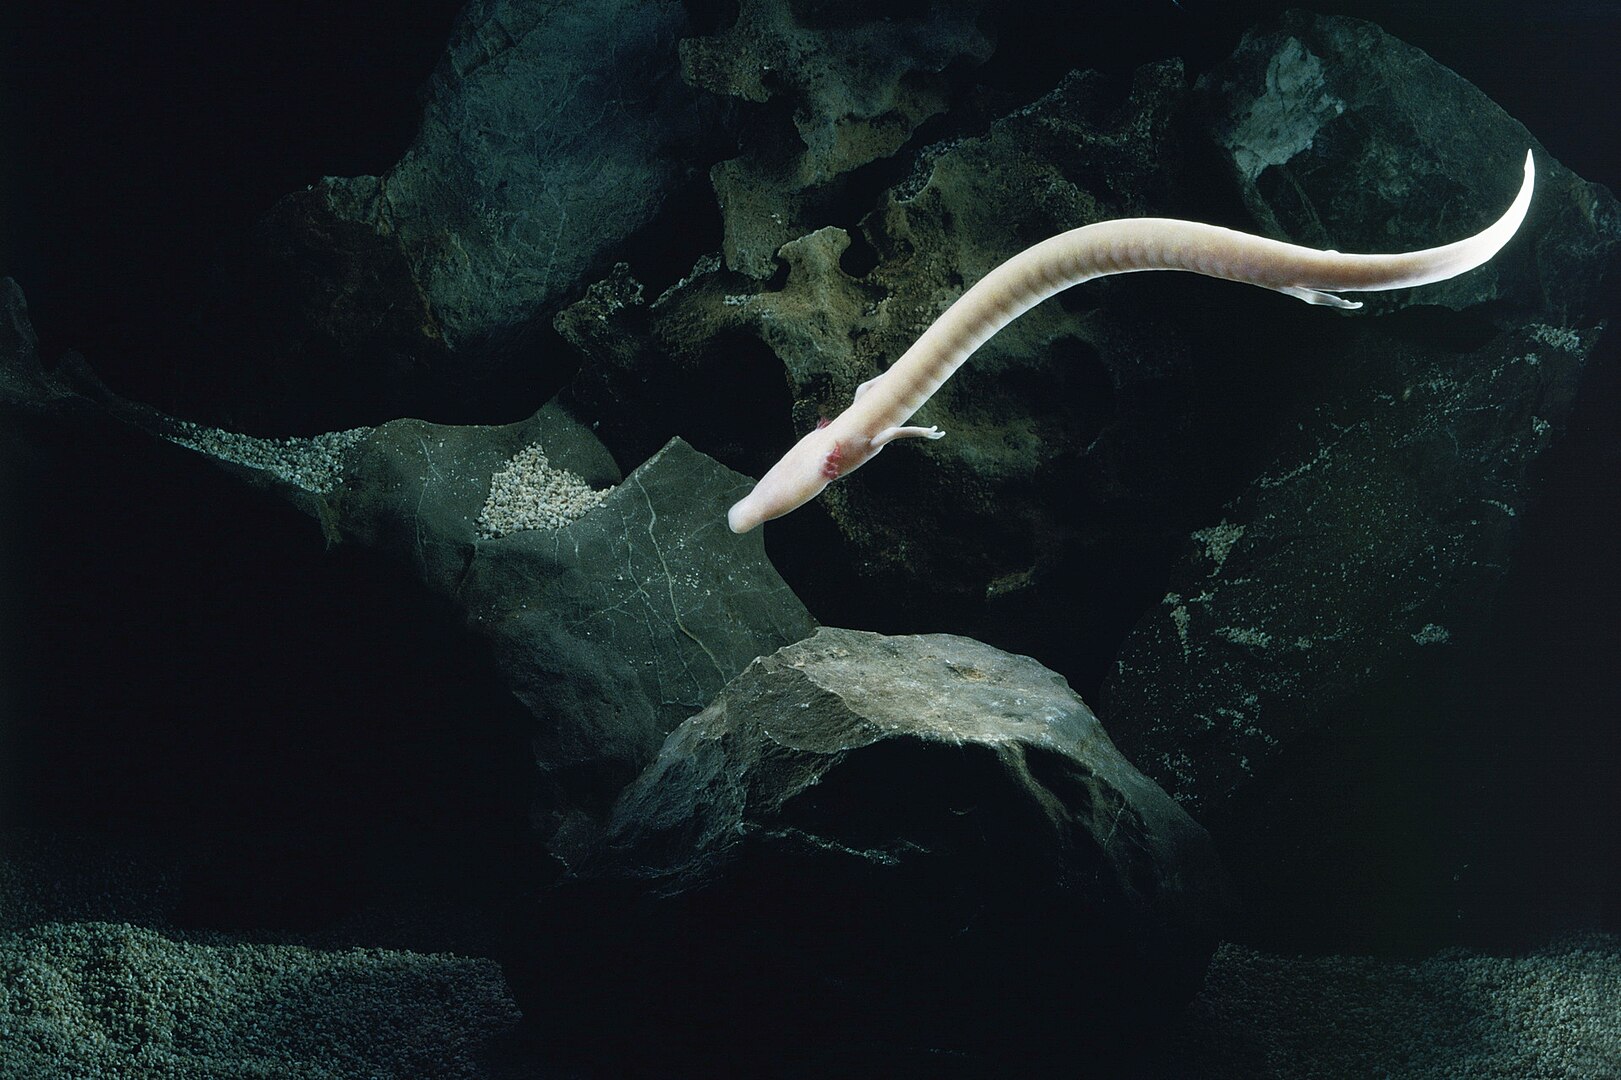 a light pink blind cave salamander called an olm swimming in the water in front of rocks